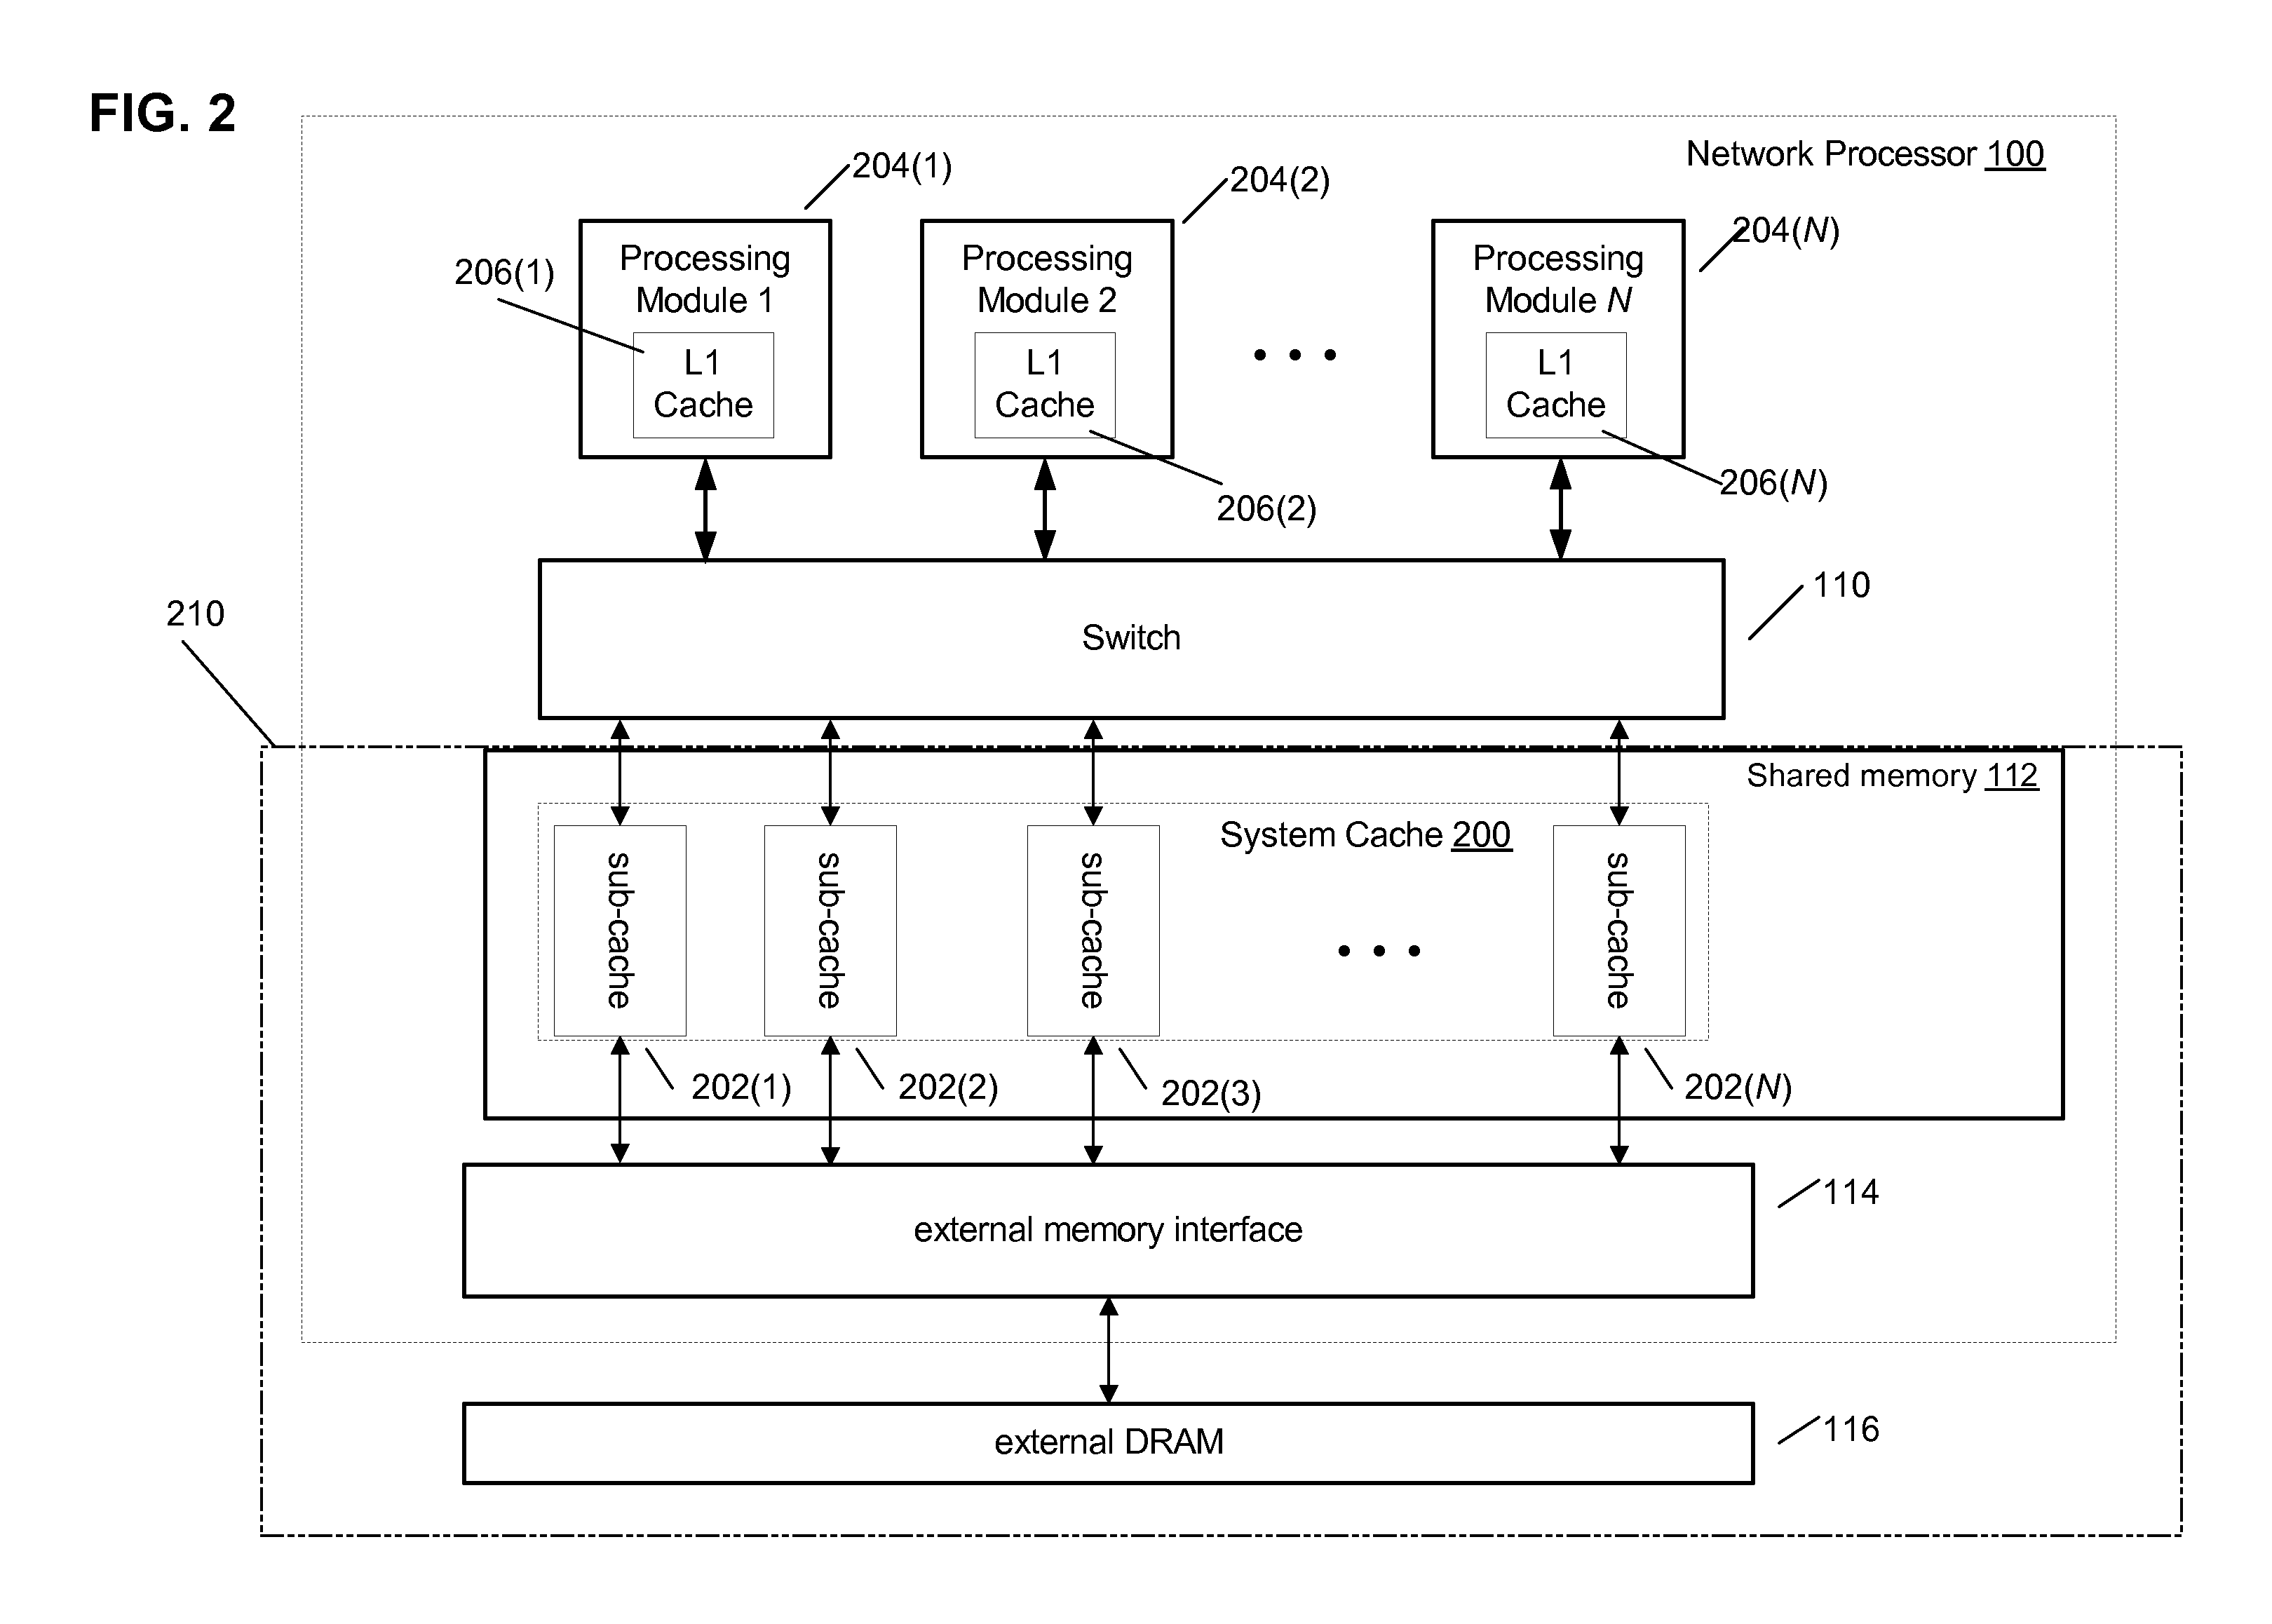 Dynamic updating of scheduling hierarchy in a traffic manager of a network processor